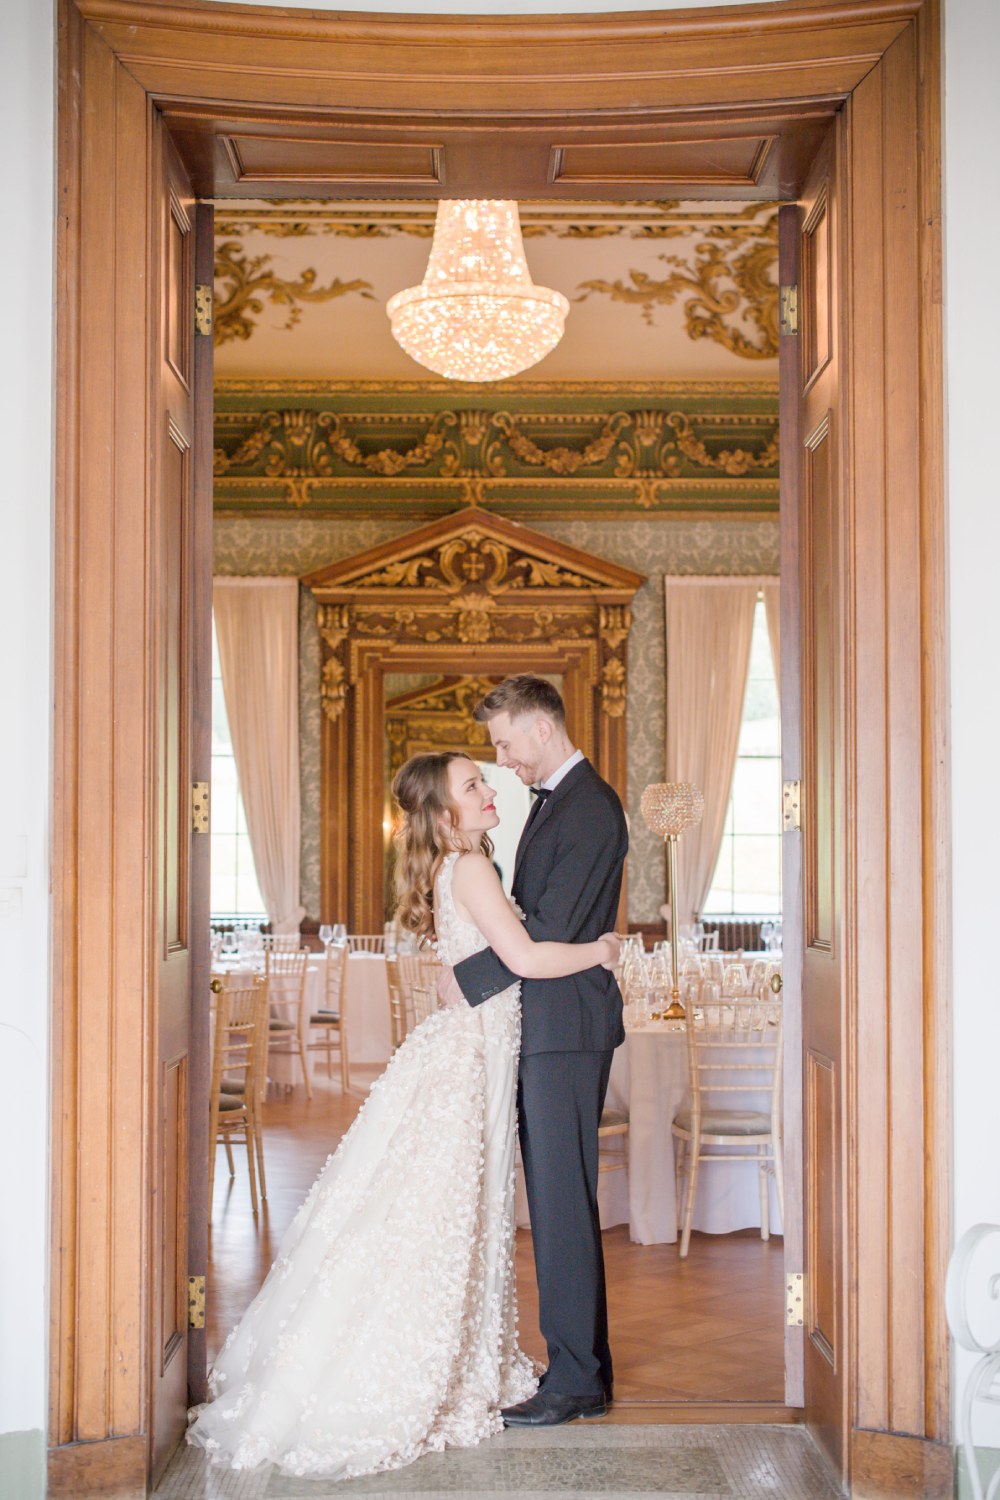 Bride & Groom embracing and smiling at one another in doorway at Hawkstone Hall & Gardens